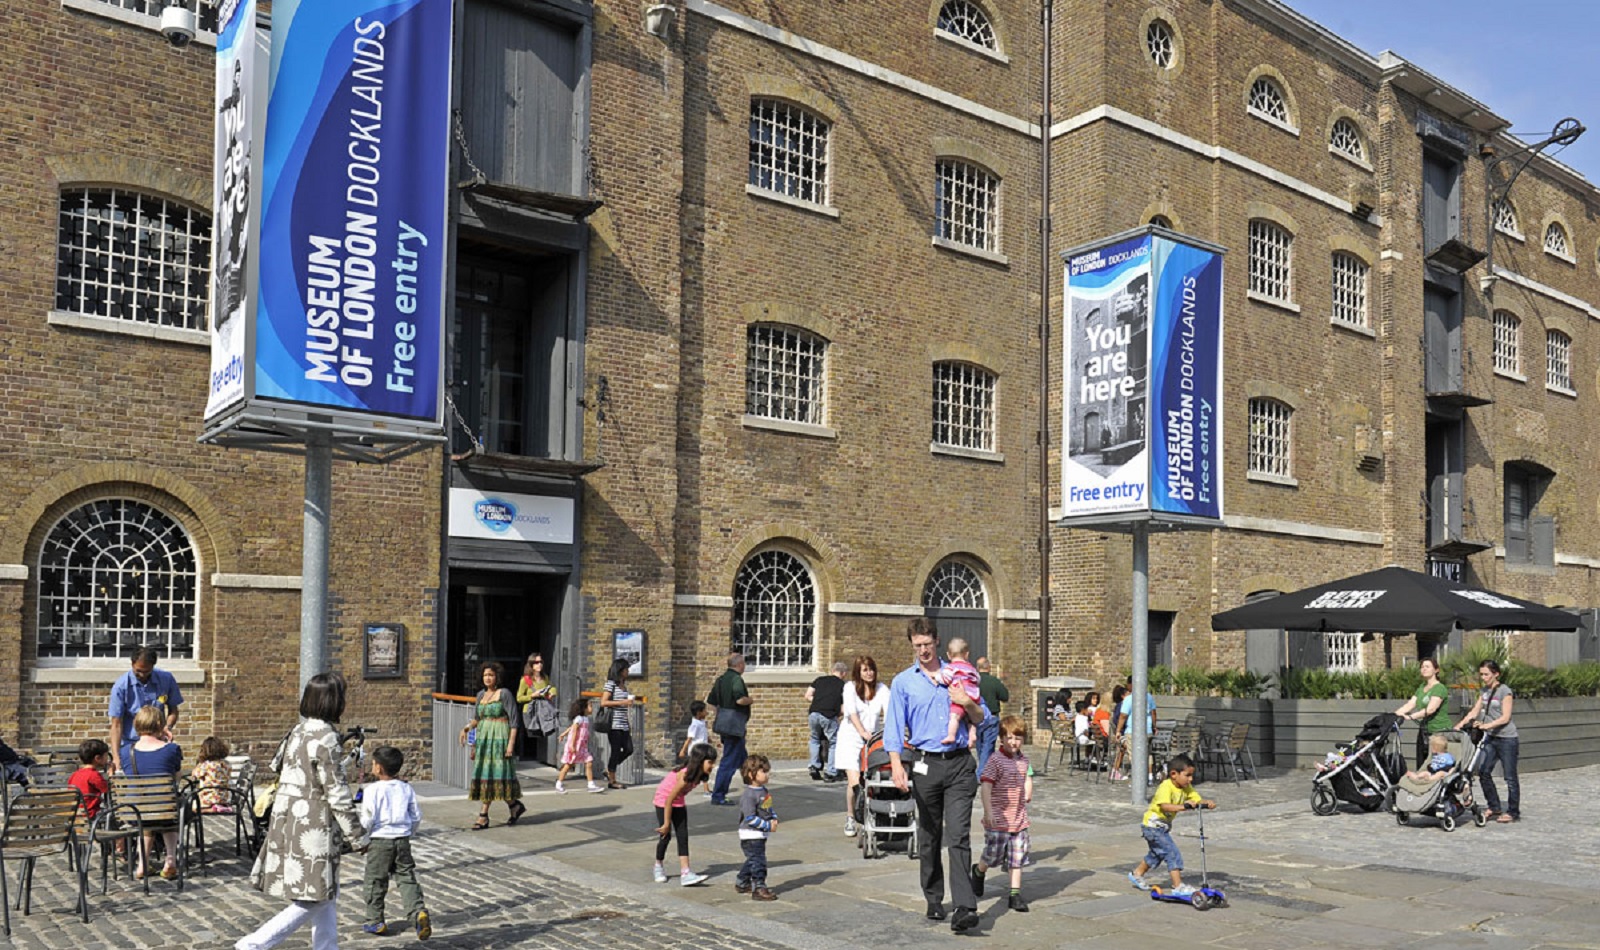 An outside view of the Museum of London Docklands with families in view.